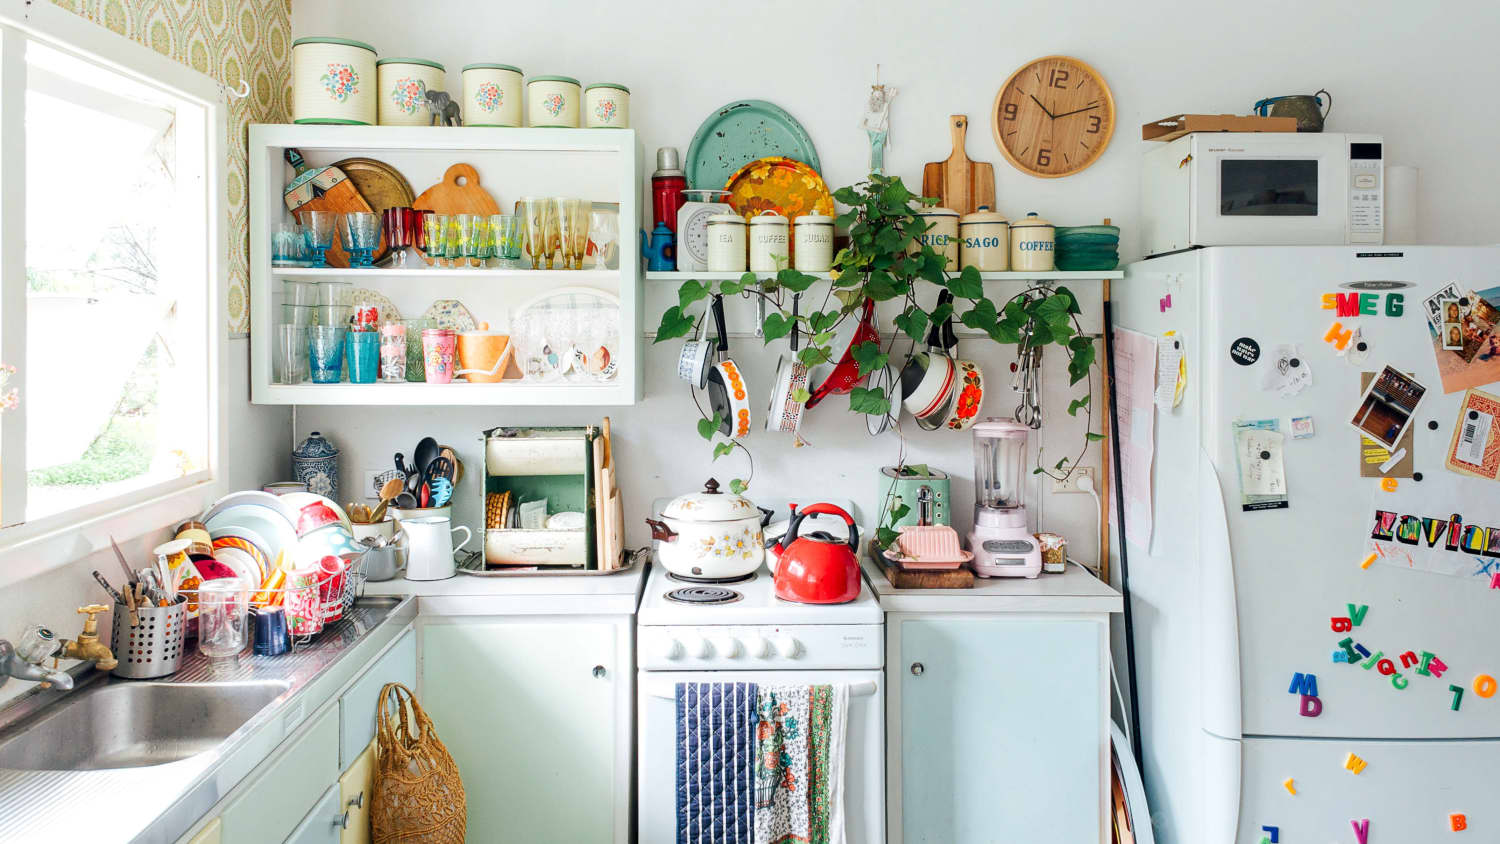 How to Organize Kitchen Appliances in a Pantry - Declutter in Minutes